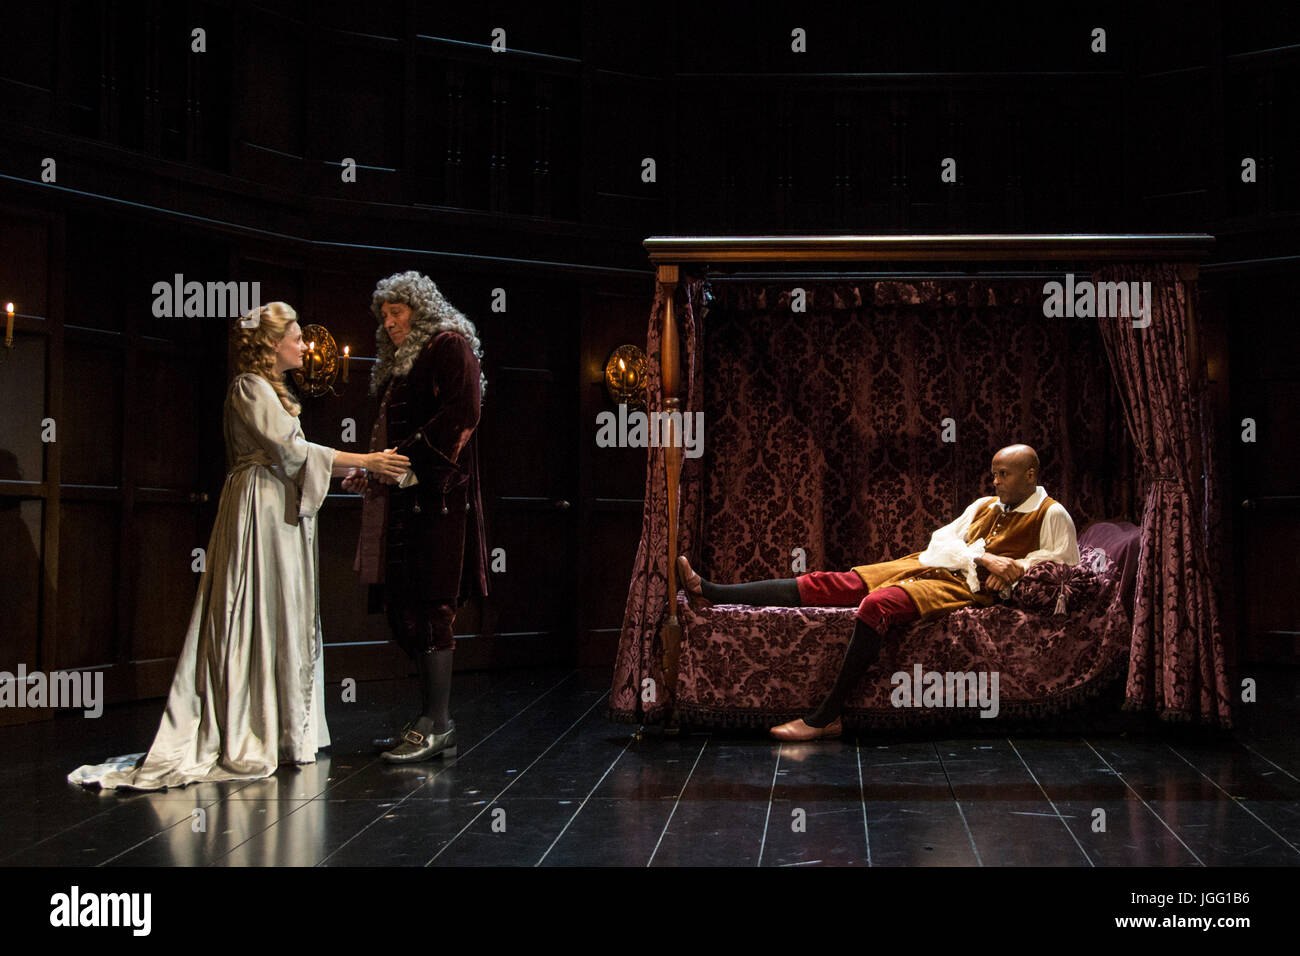 London, UK. 6 July 2017. L-R: Romola Garai (Sarah Churchill), Richard Hope (Sydney Godolphin), Chu Omambala (John Churchill). After a sold out run at the Swan Theatre in Stratford-upon-Avon in 2015-16, the Royal Shakespeare Company production of Queen Anne transfers to the Theatre Royal Haymarket from 30 June for a thirteen week limited run until 30 September 2017. Queen Anne is a new play written by Helen Edmundson and directed by Natalie Abrahami. With Emma Cunniffe as Queen Anne/Princess Anne, Romola Garai as Sarah Churchill/Duchess of Marlborough. Photo: Bettina Strenske/Alamy Live News Stock Photo